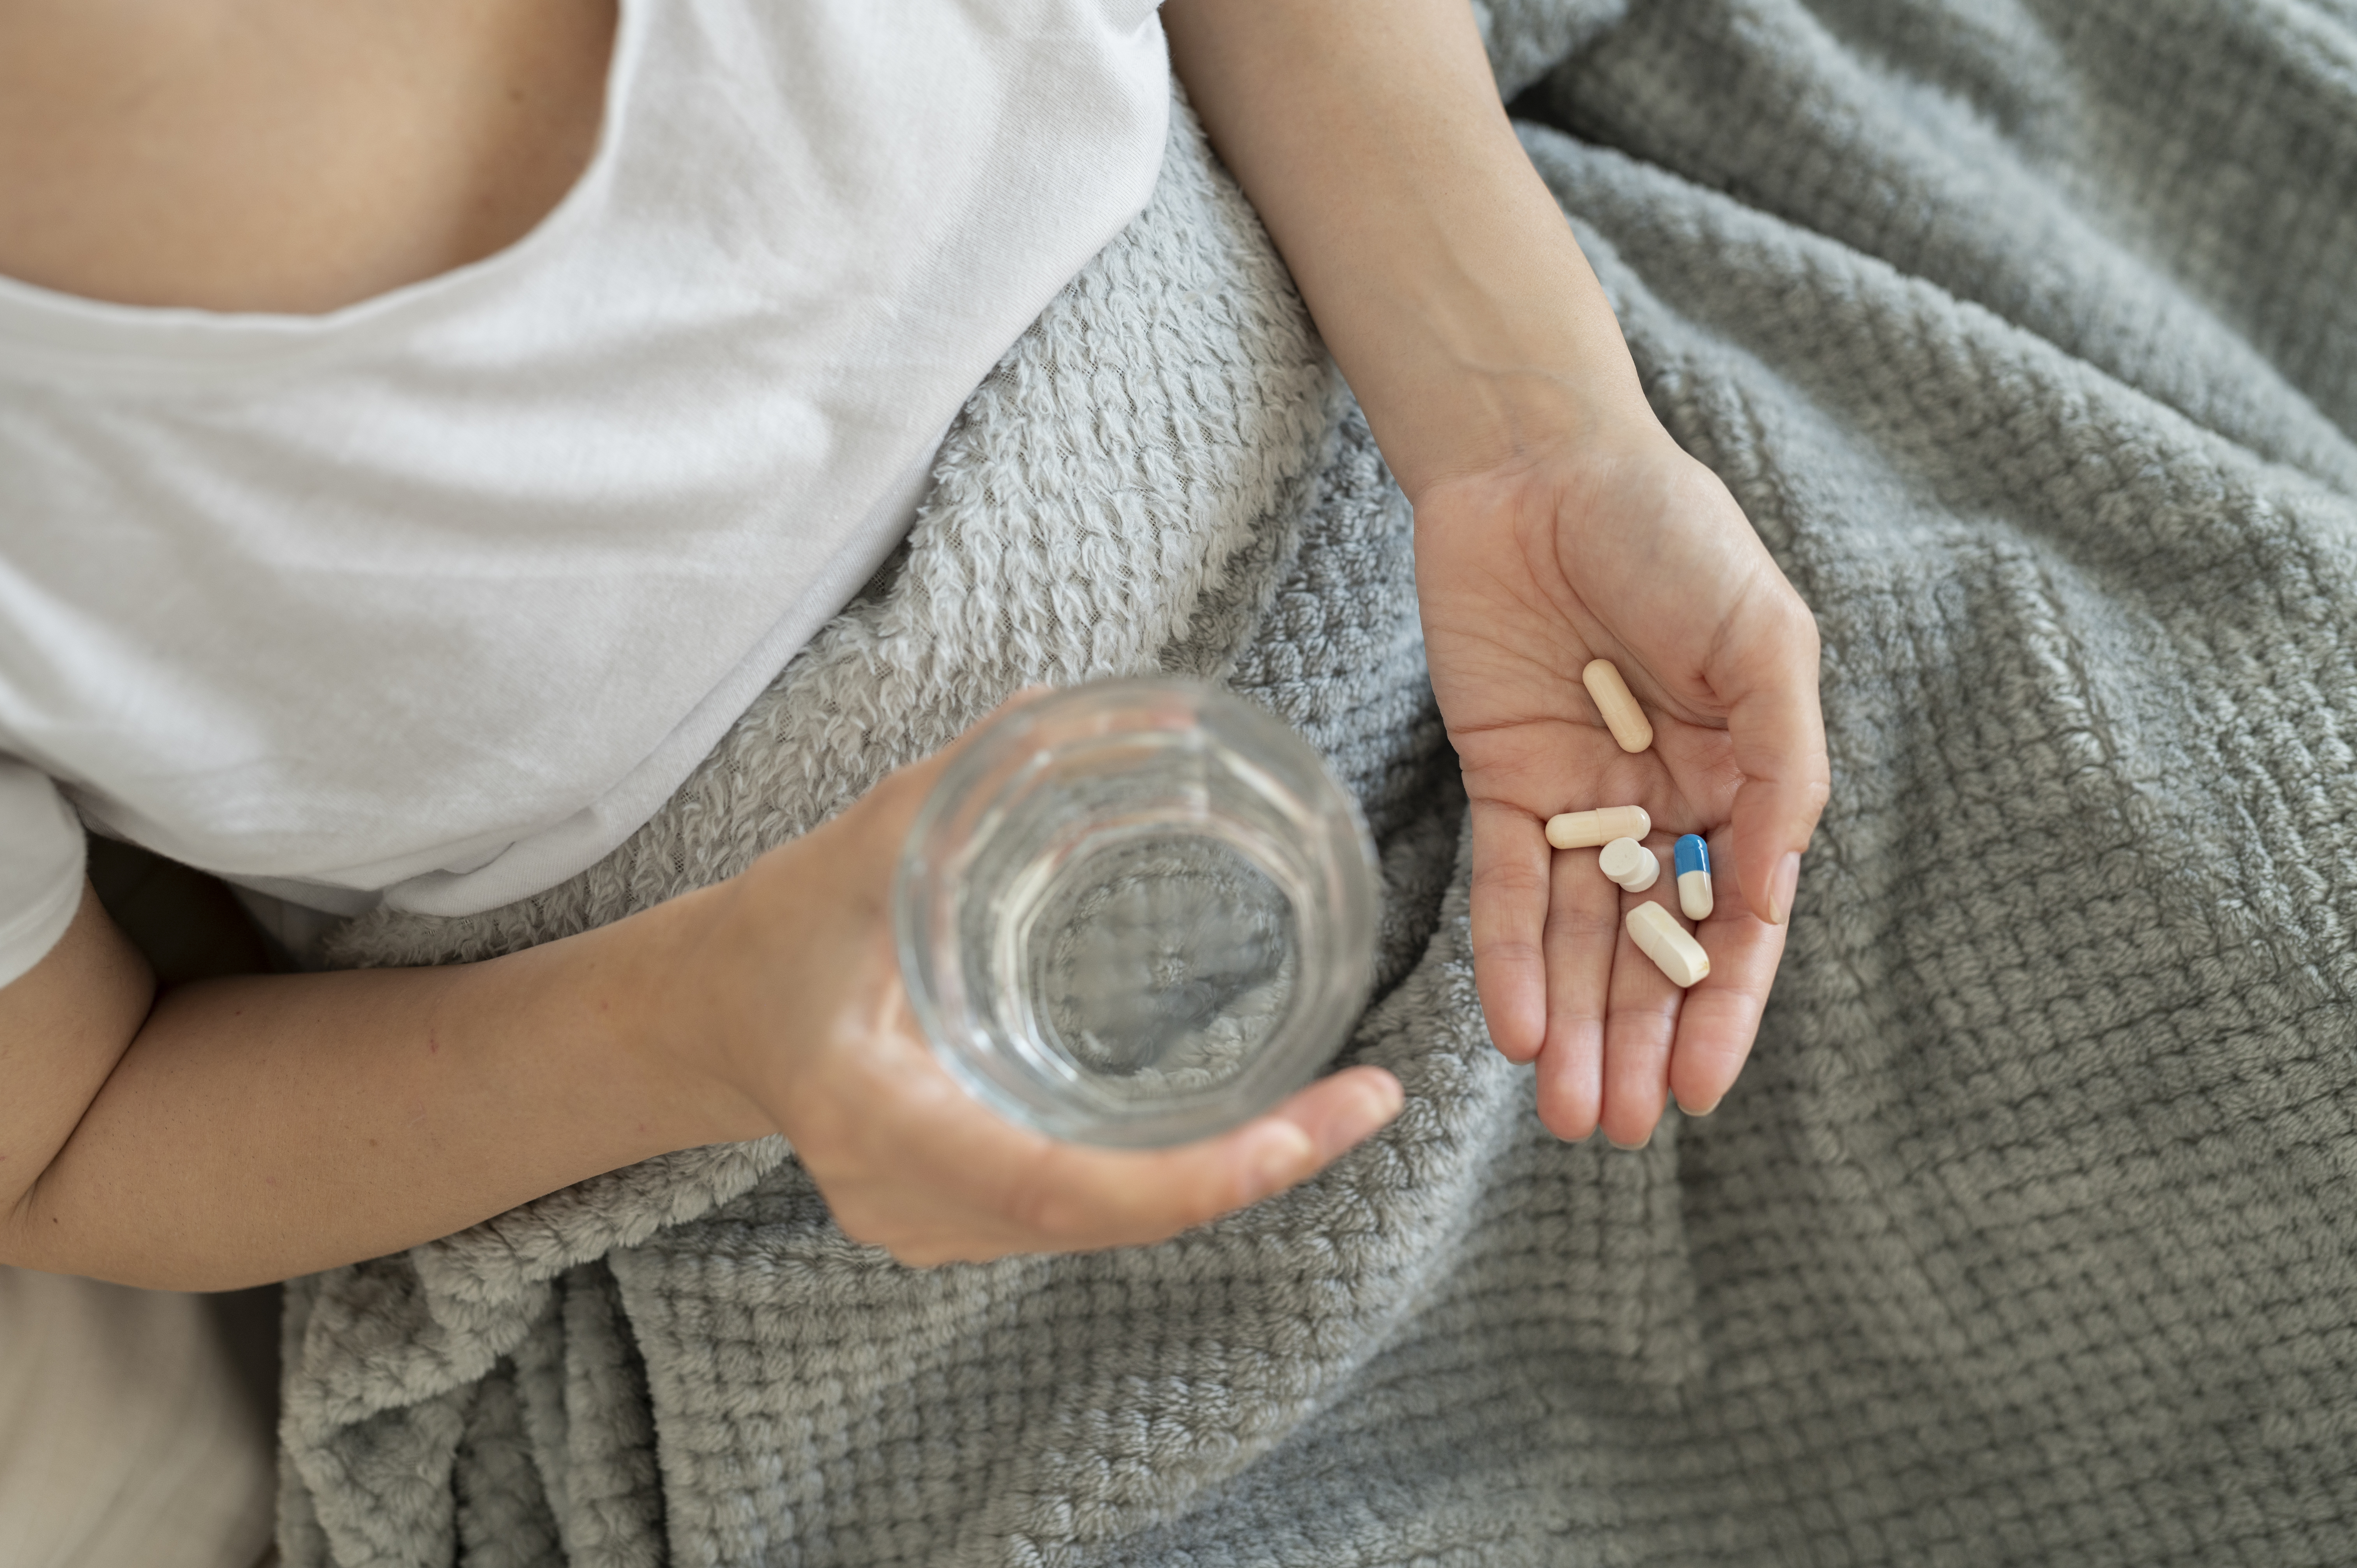 A person taking various medications, in a file image.